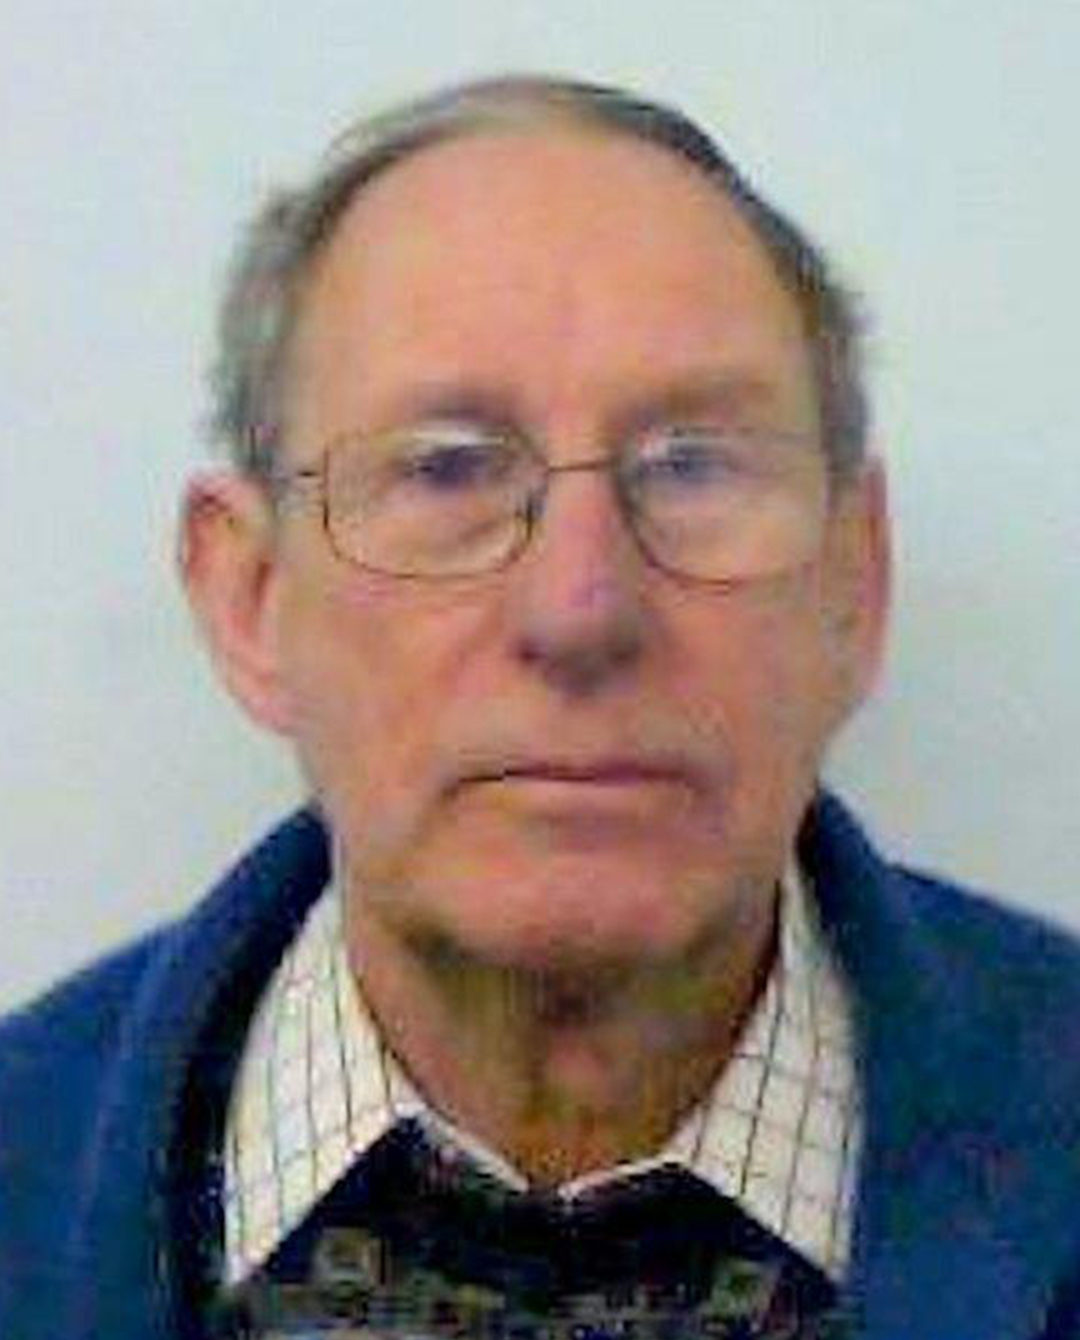 Frank Skipwith was jailed at Hove Crown Court